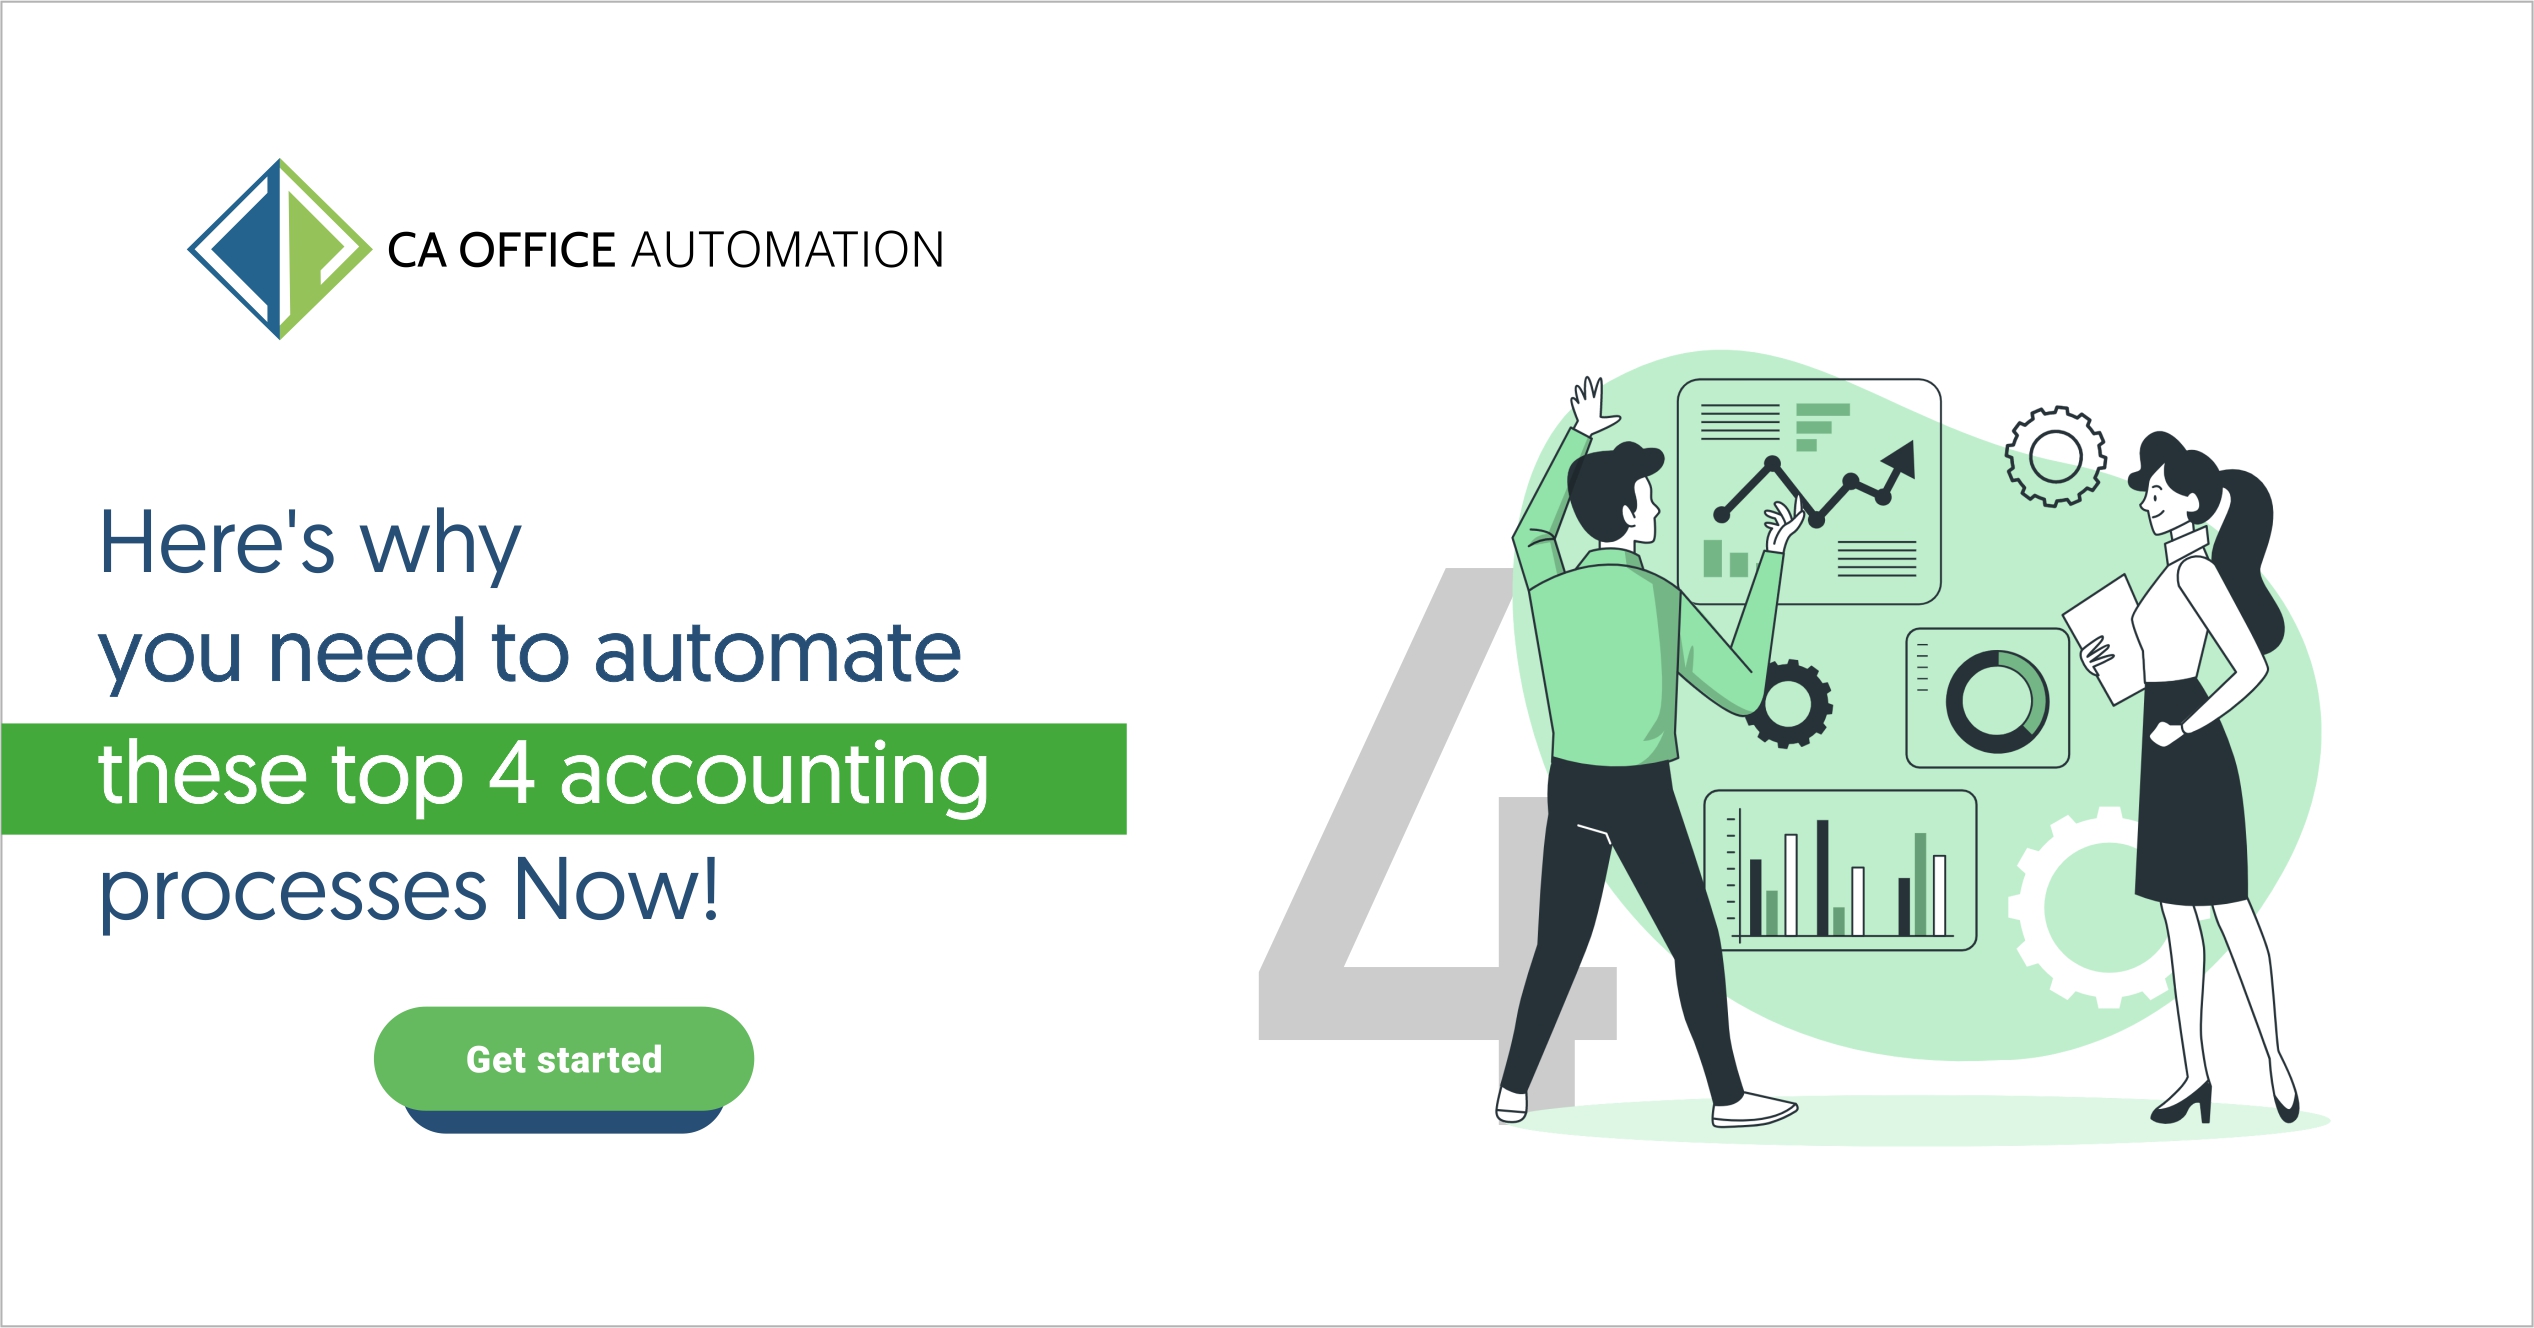 Here’s Why You Need to Automate These Top 4 Accounting Processes Now!